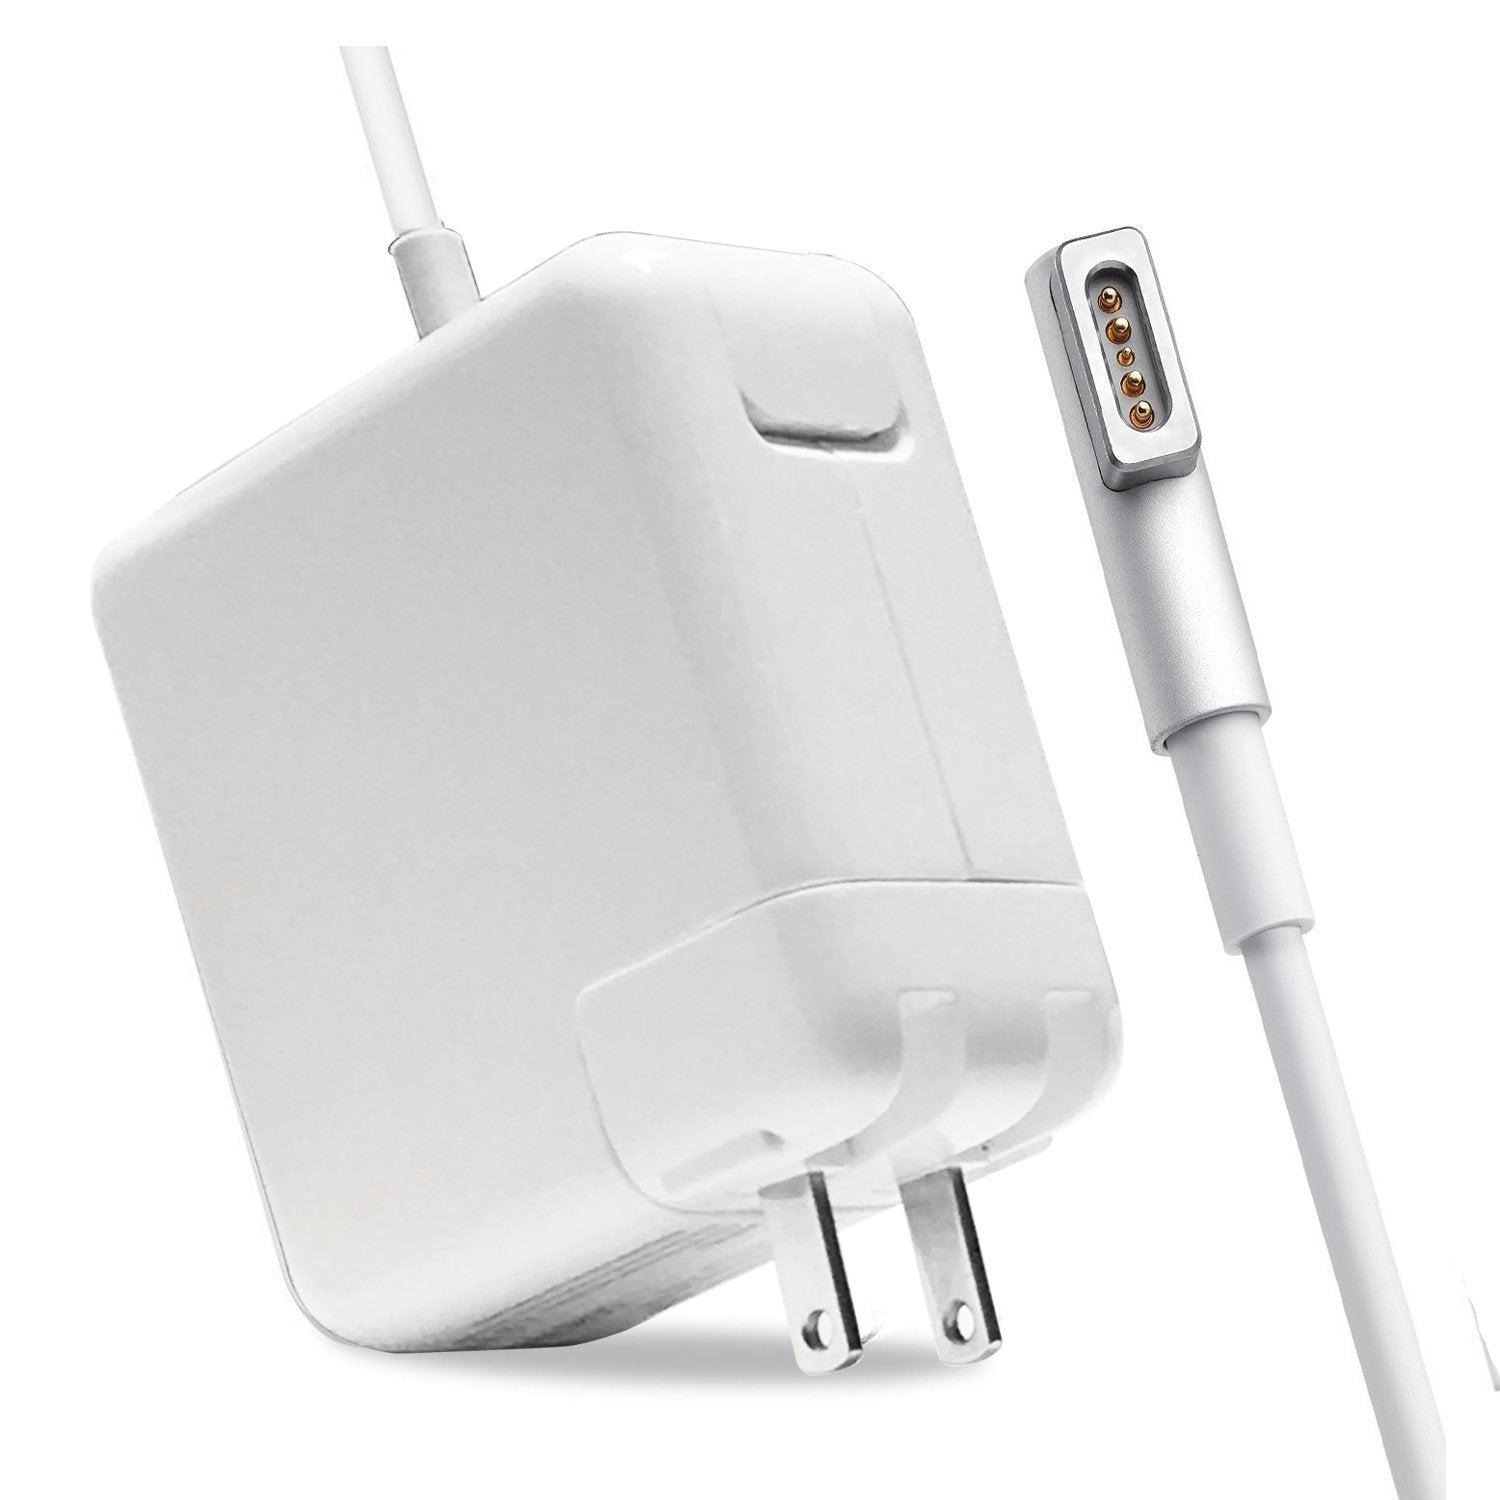 apple macbook a1181 laptop charger